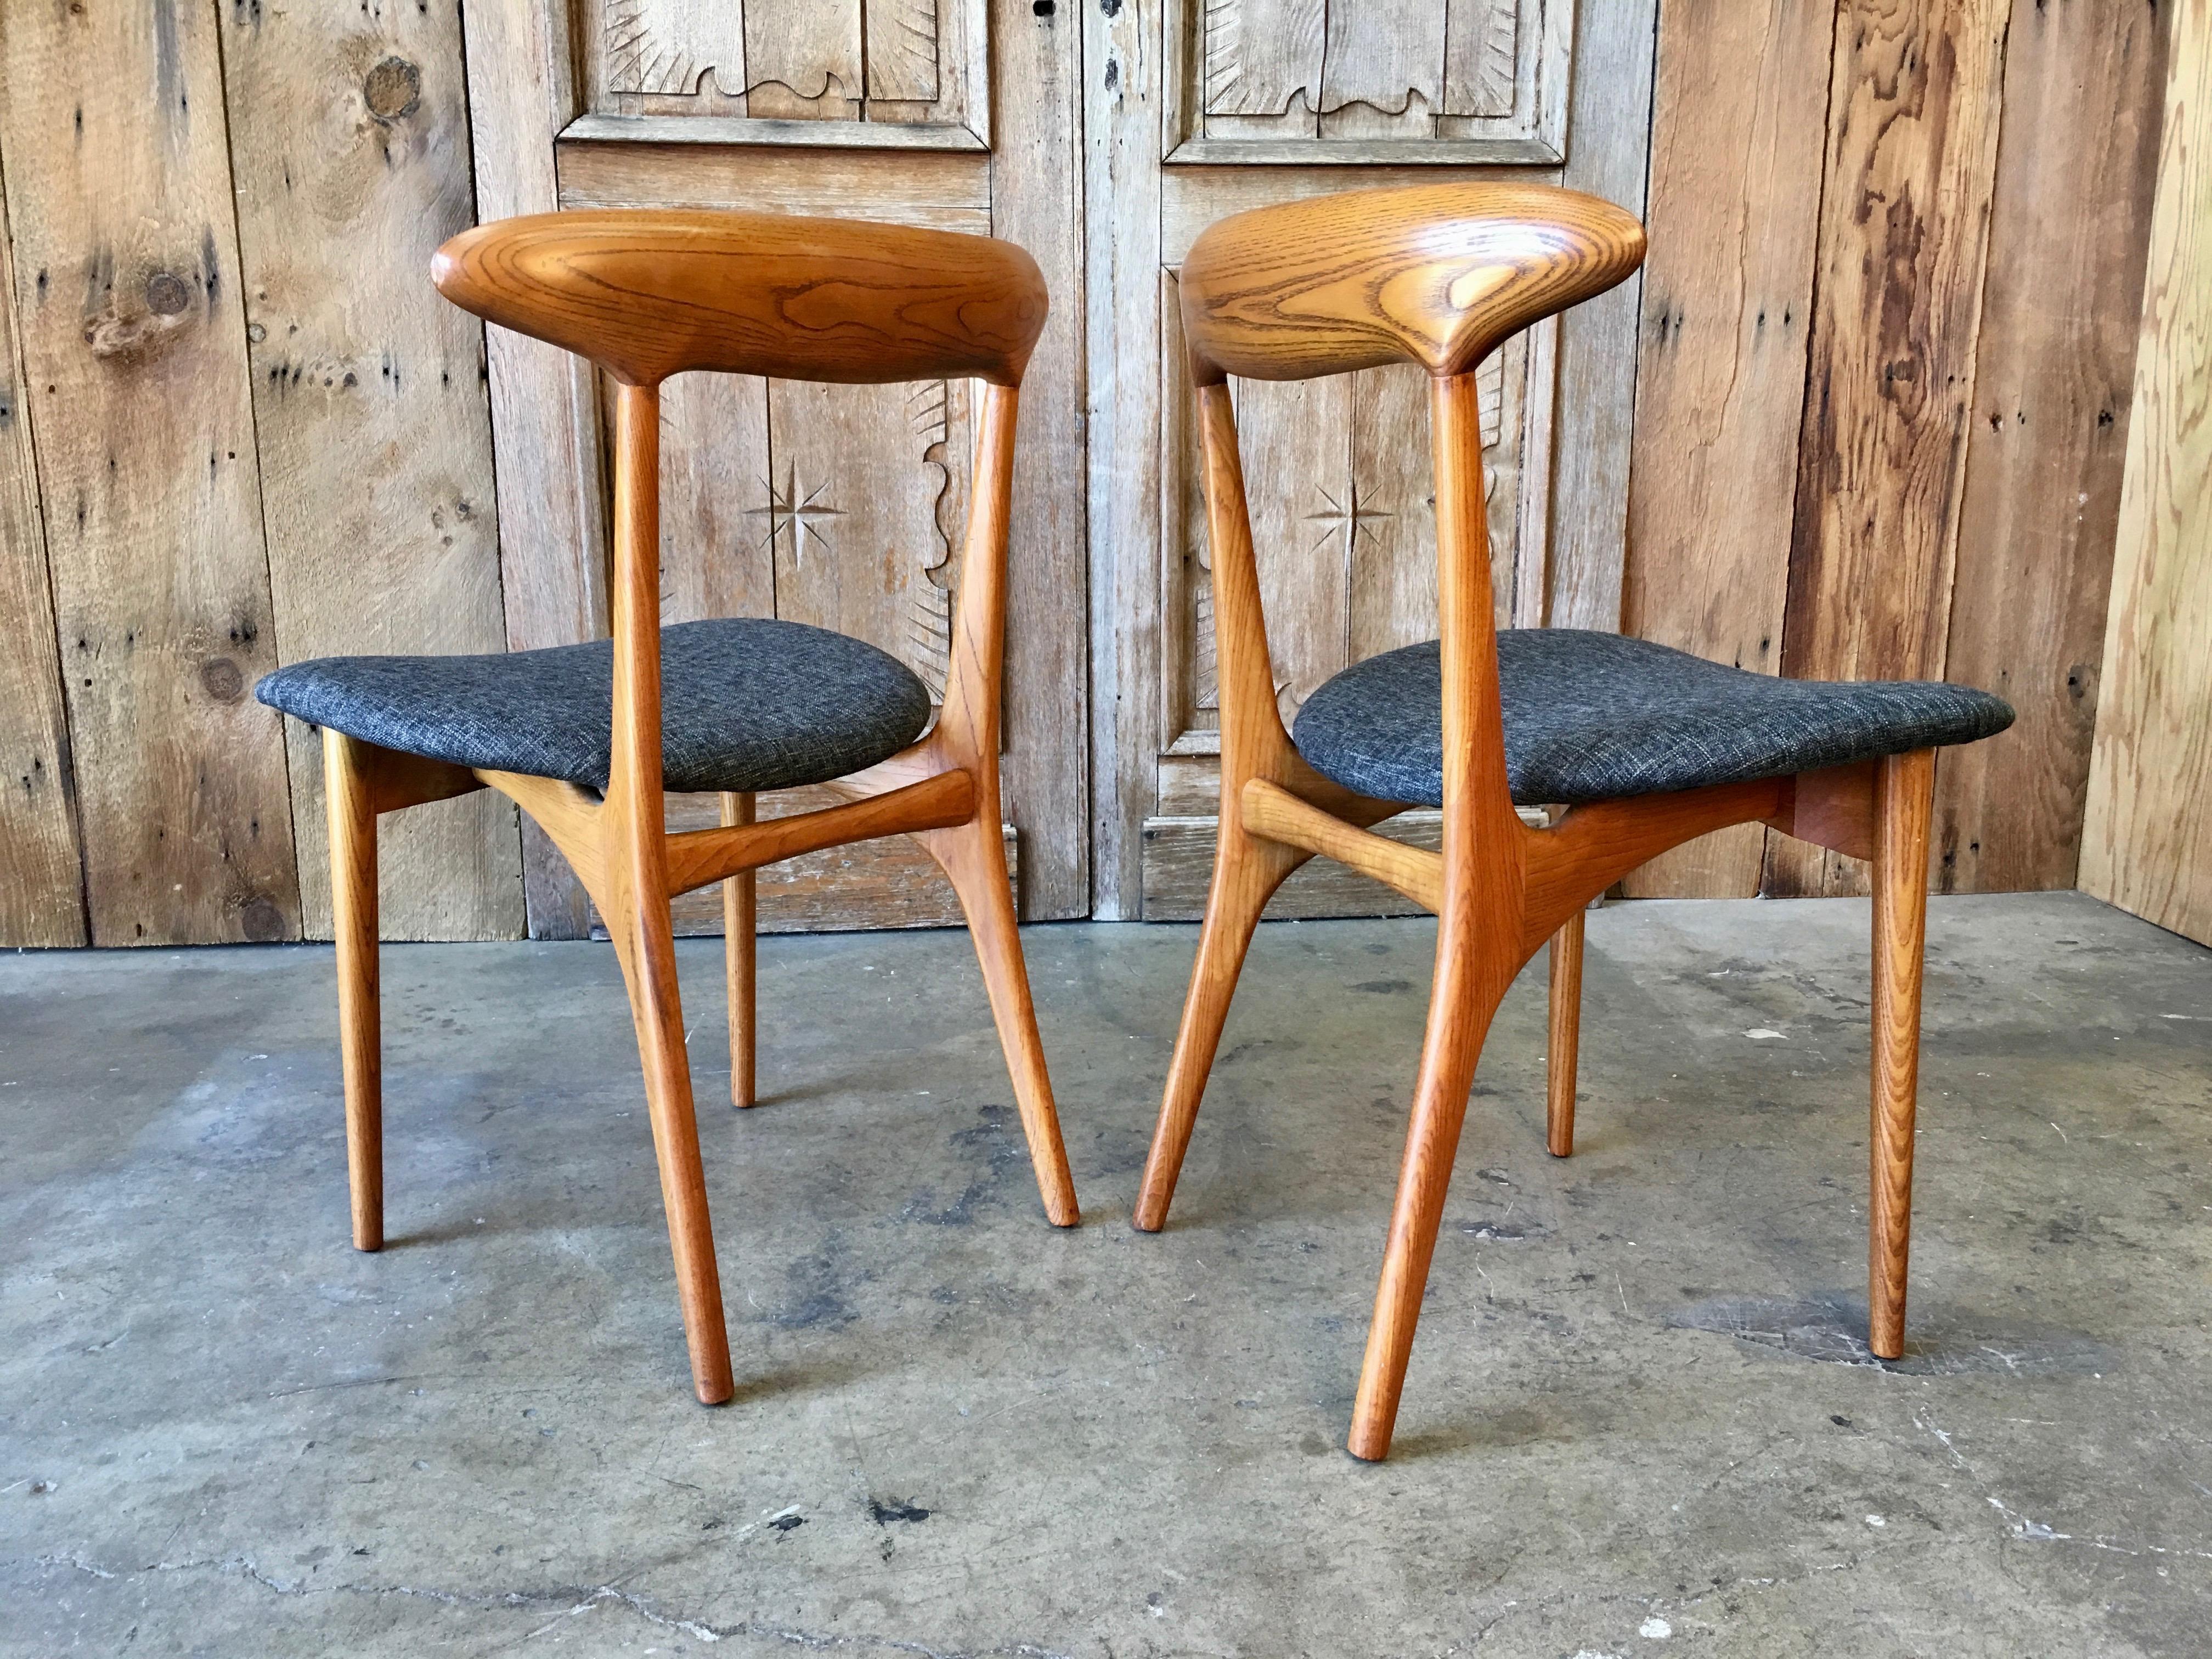 Set of four Danish modern oak dining chairs with new upholstery.